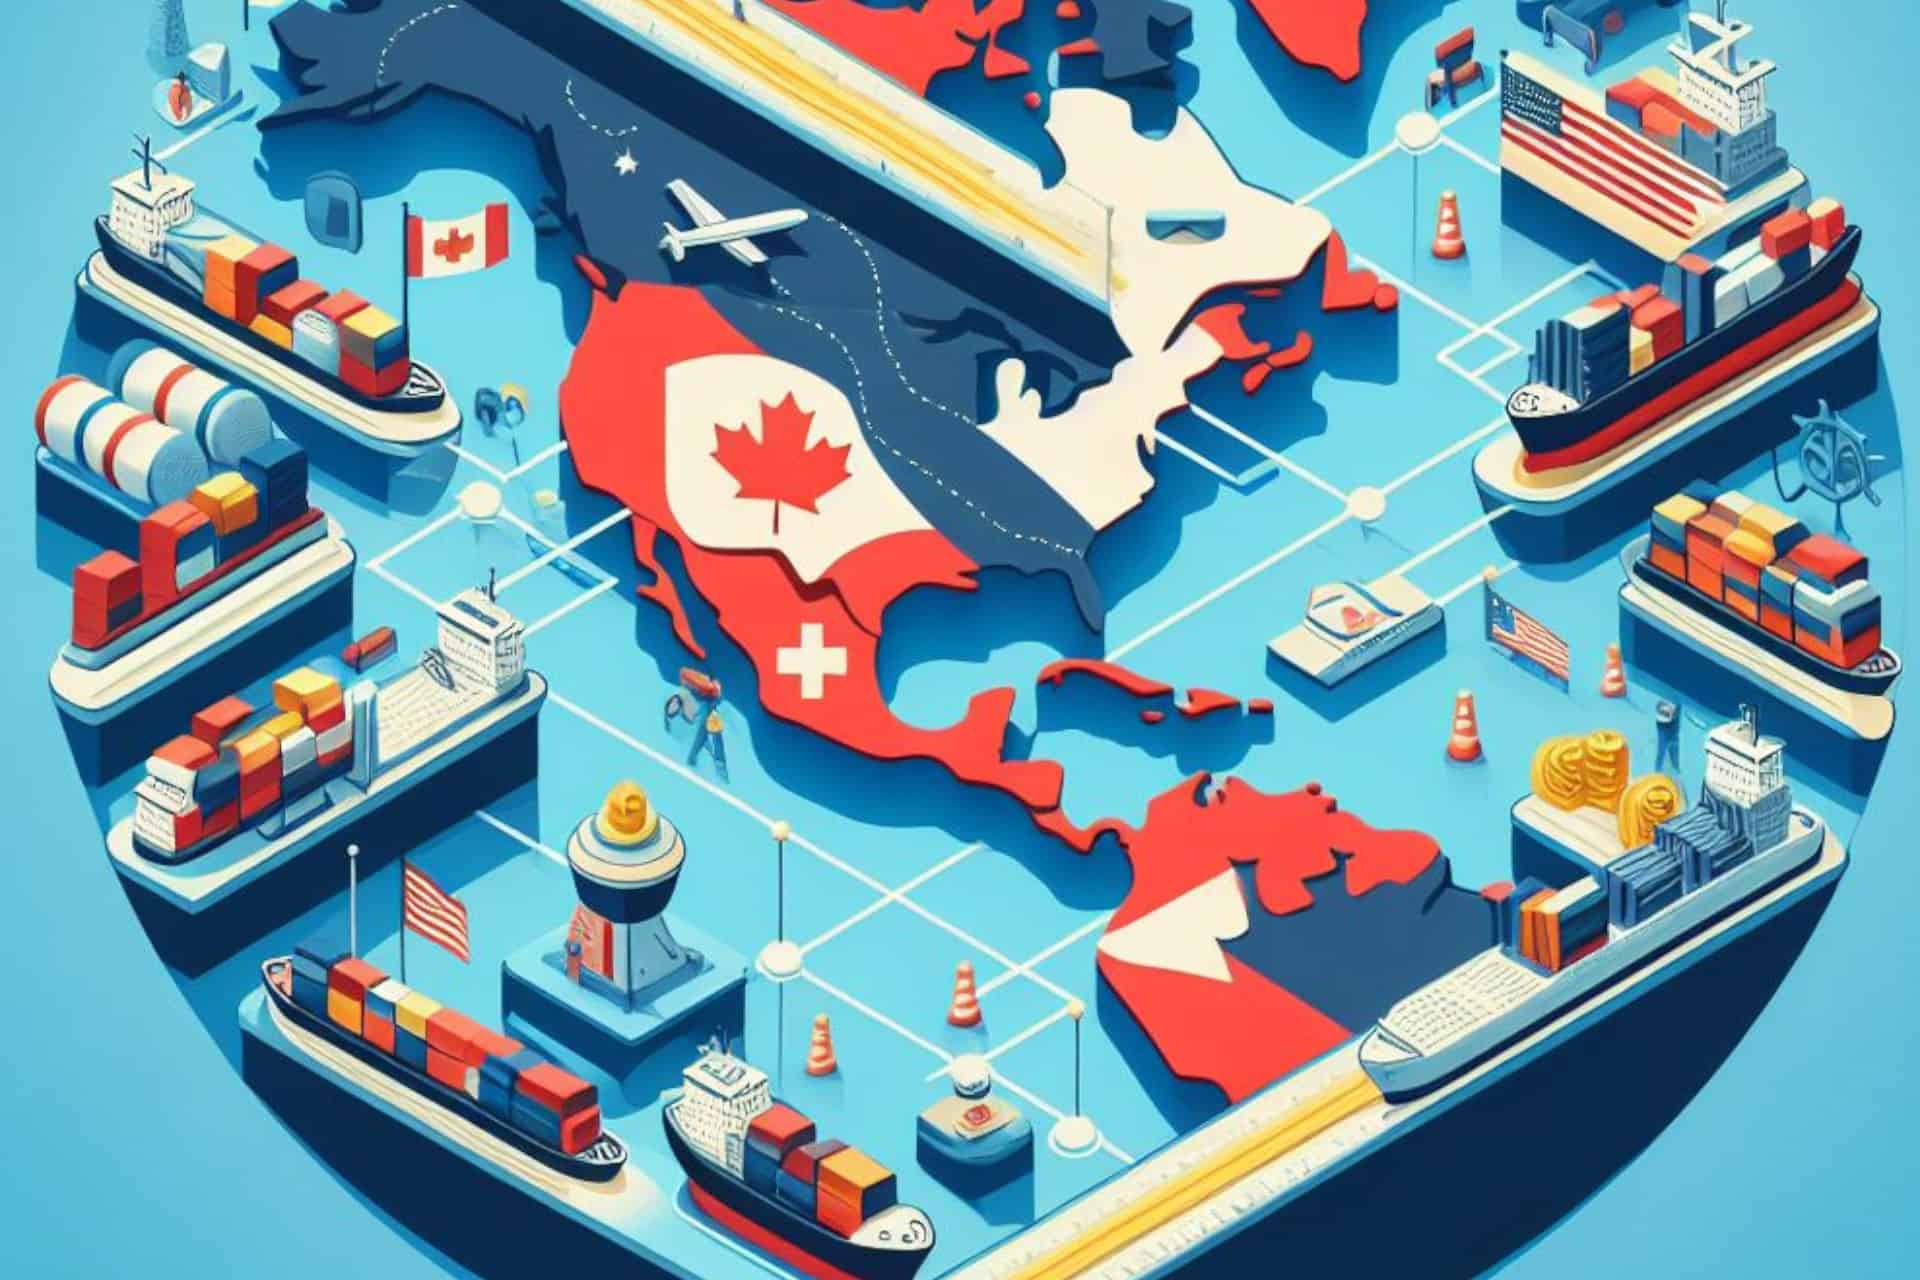 North America's Role in Promoting Cross-Border Trade Security